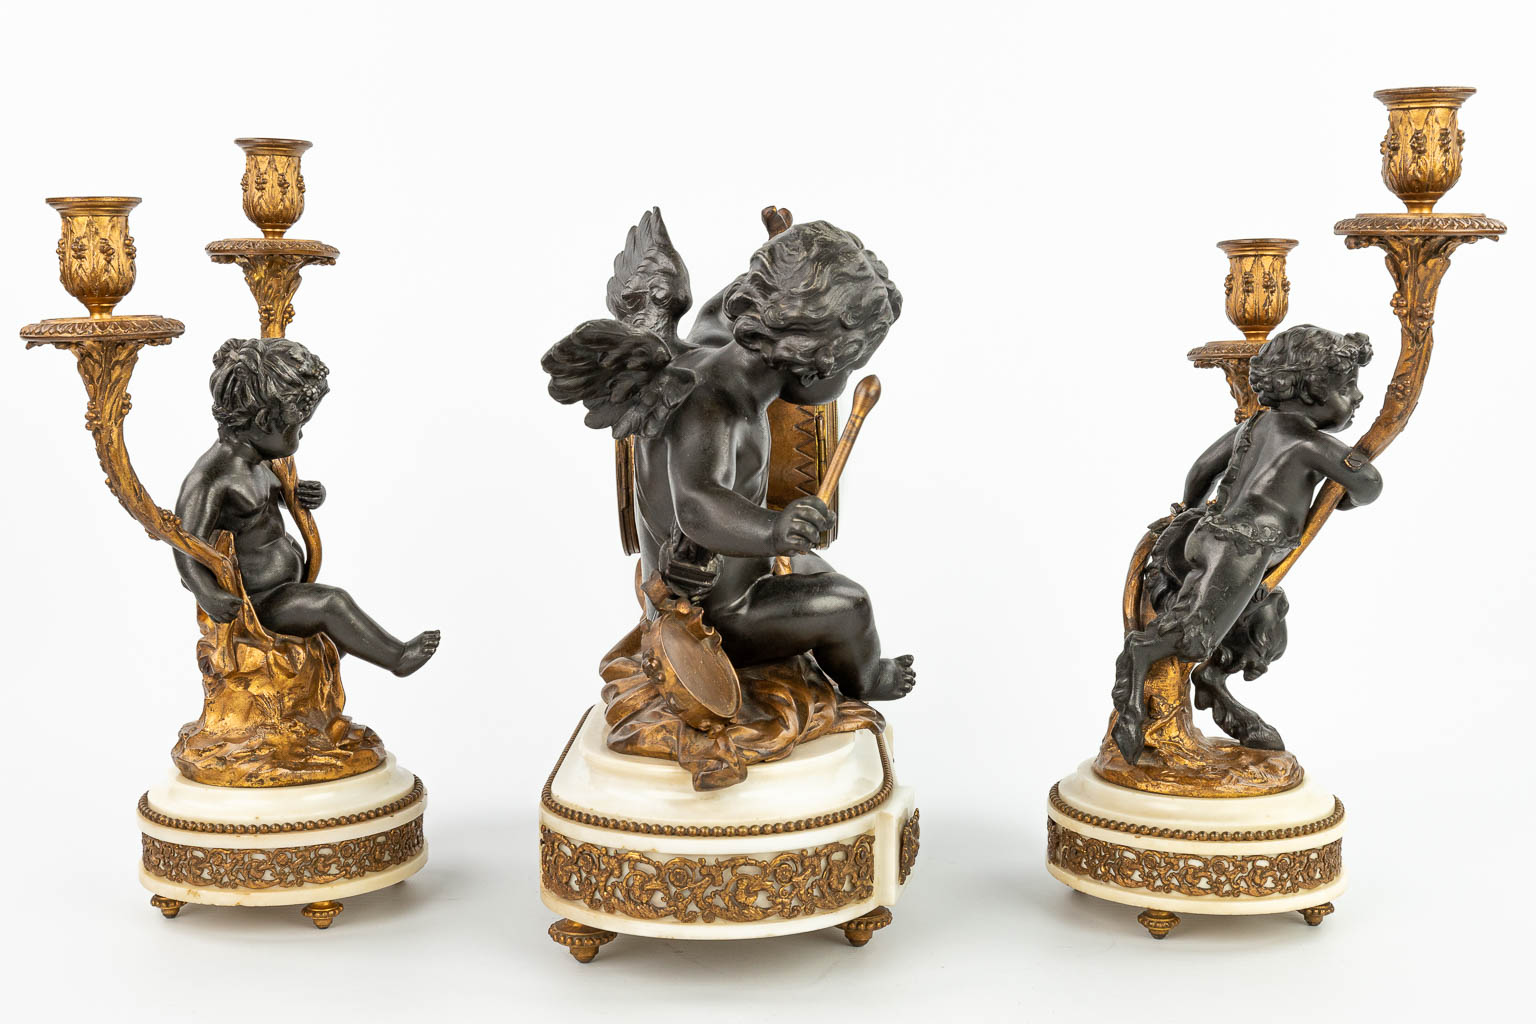 A three-piece mantle clock decorated with putti and a satyr, made of patinated and gilt spelter. (H:37cm)